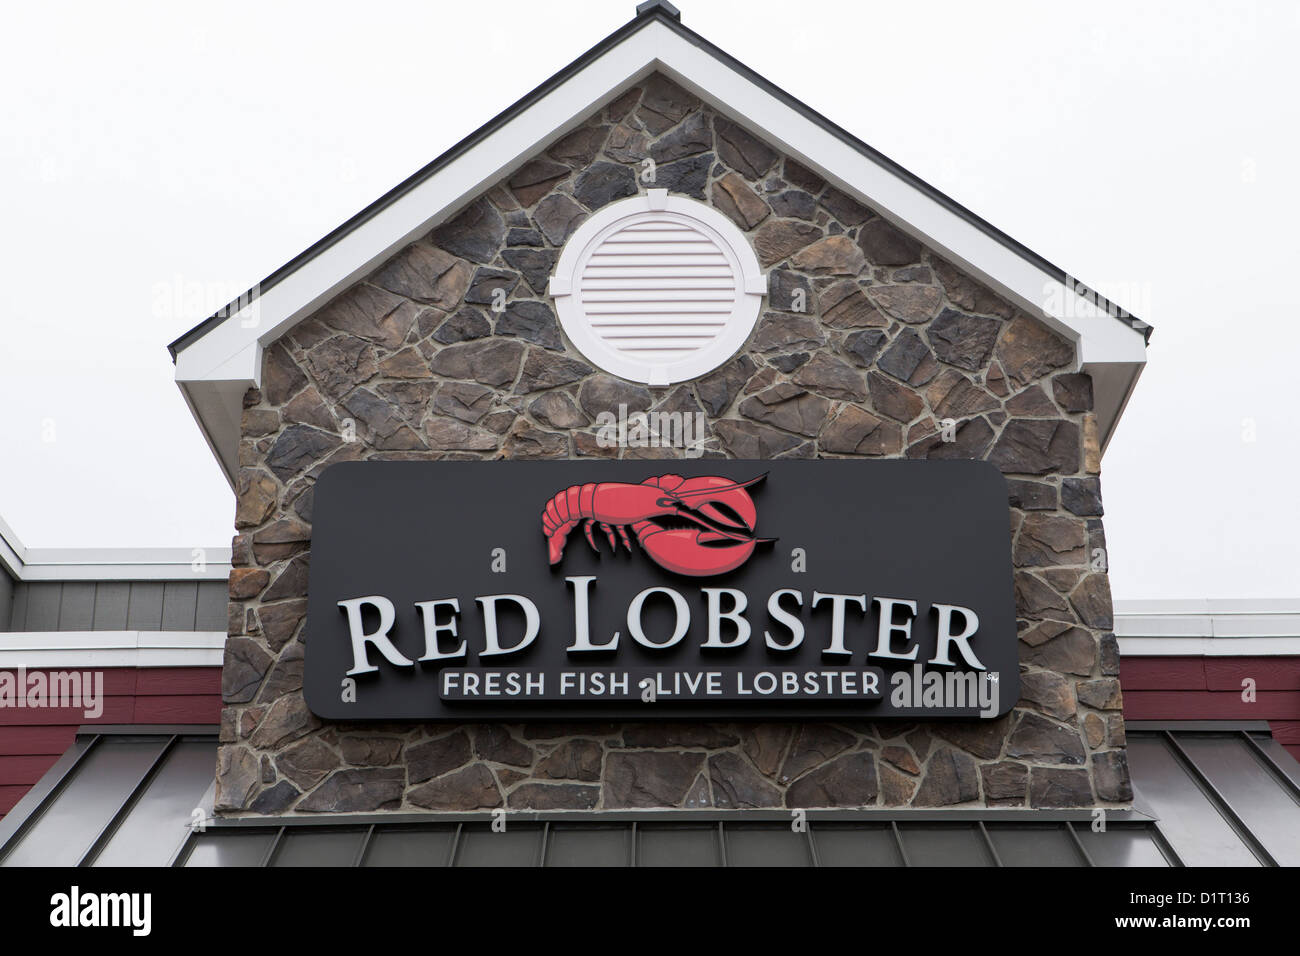 A Red Lobster seafood casual dining chain restaurant.  Stock Photo